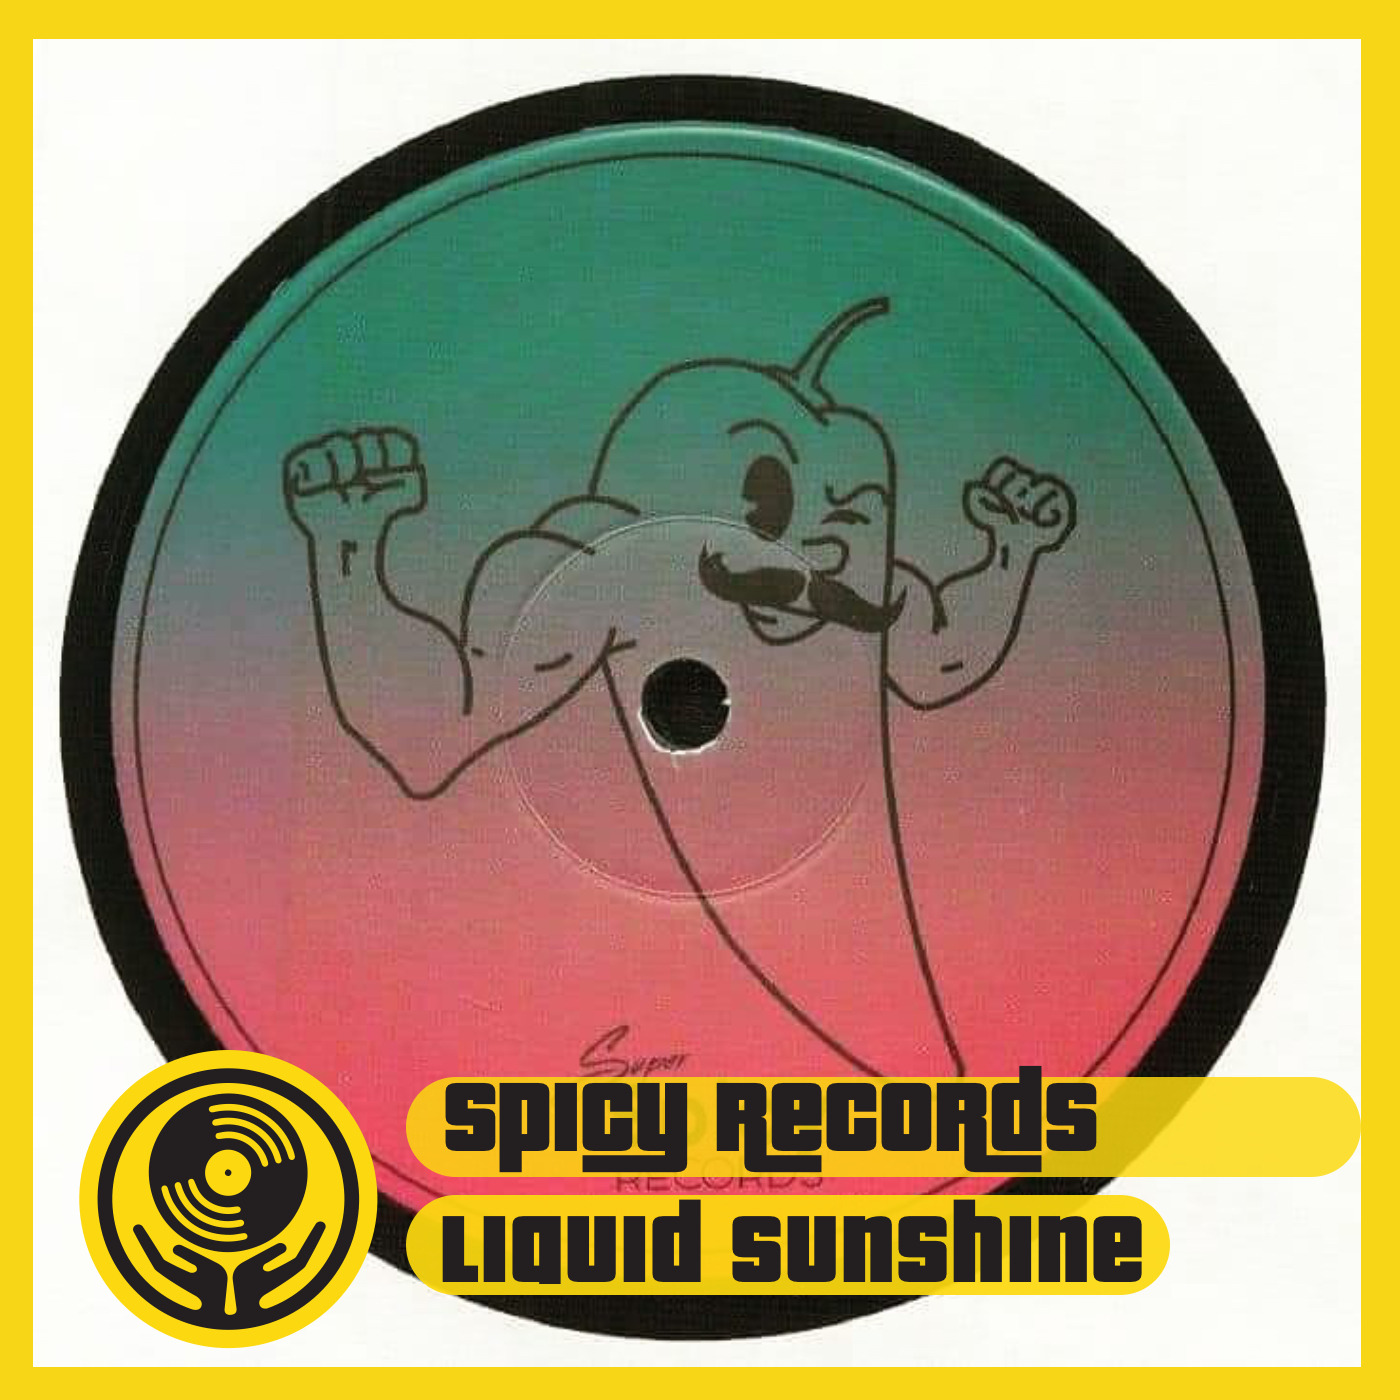 Super Spicy Records with Late Night Sunshine @ 2XX FM - Show #185 - 07-07-2022